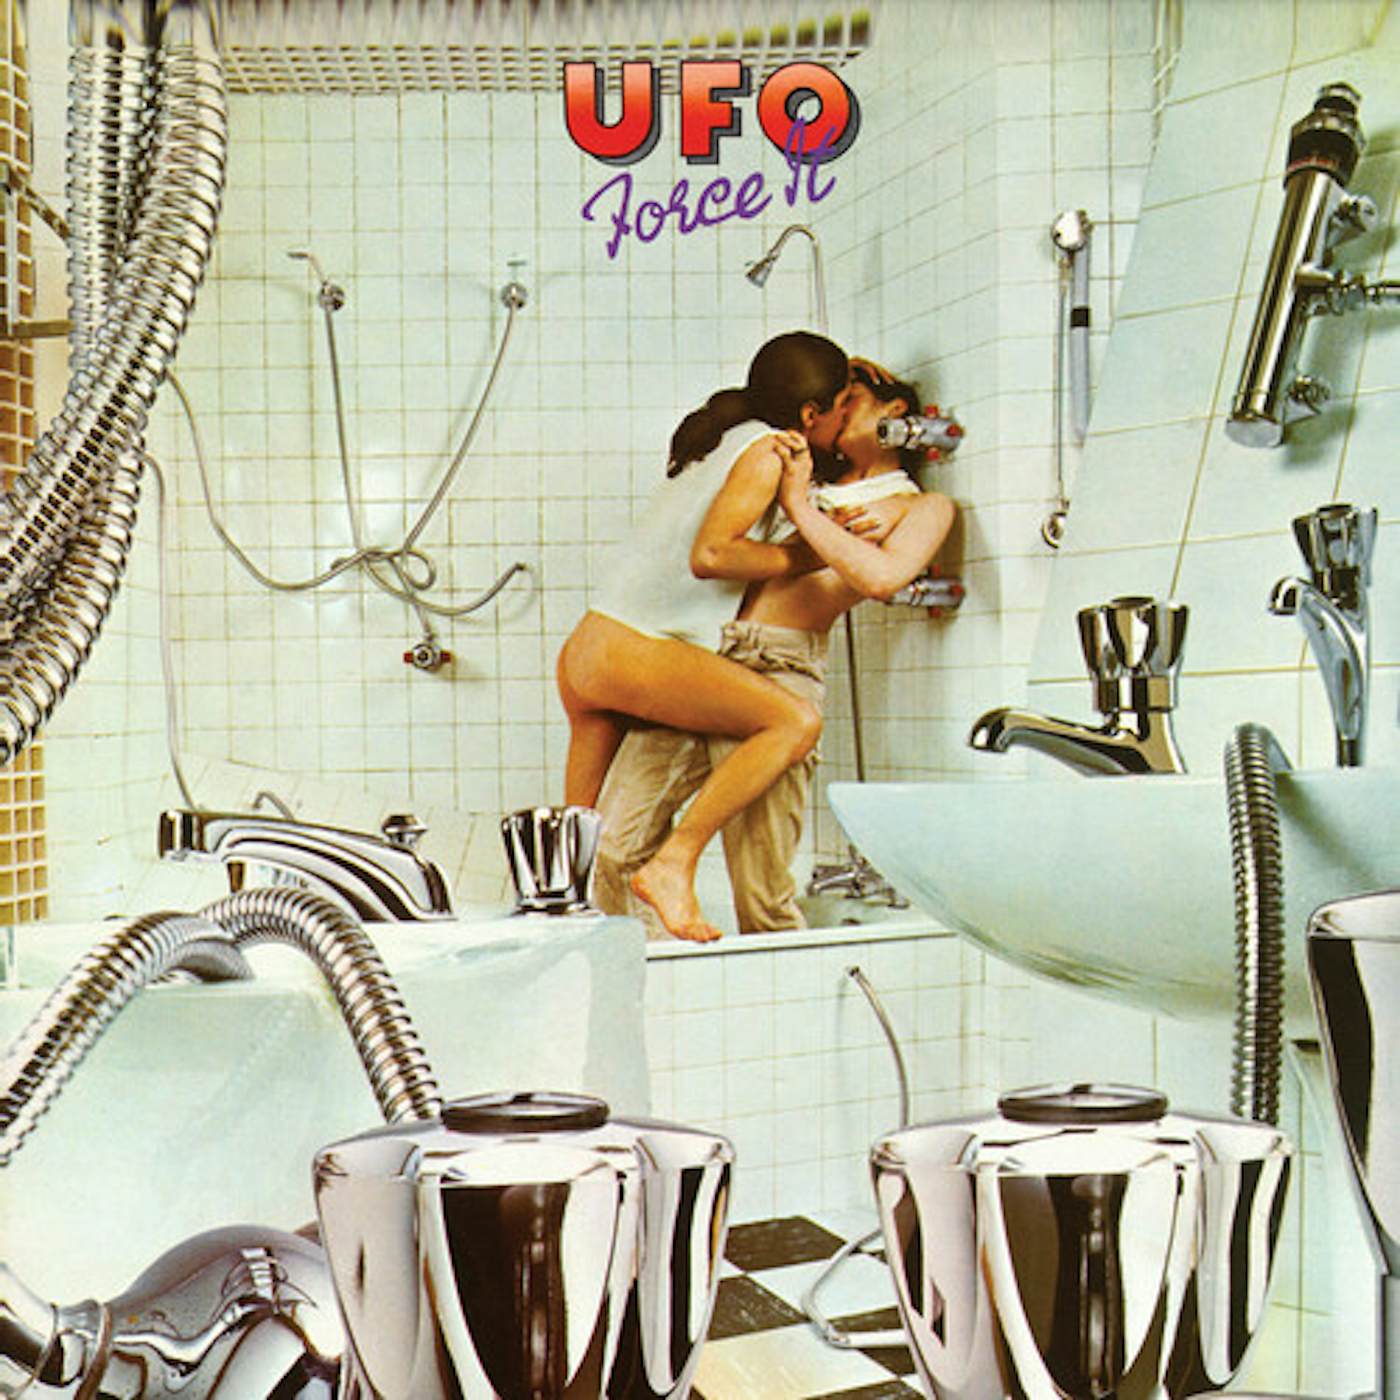 UFO FORCE IT (DELUXE EDITION) CD